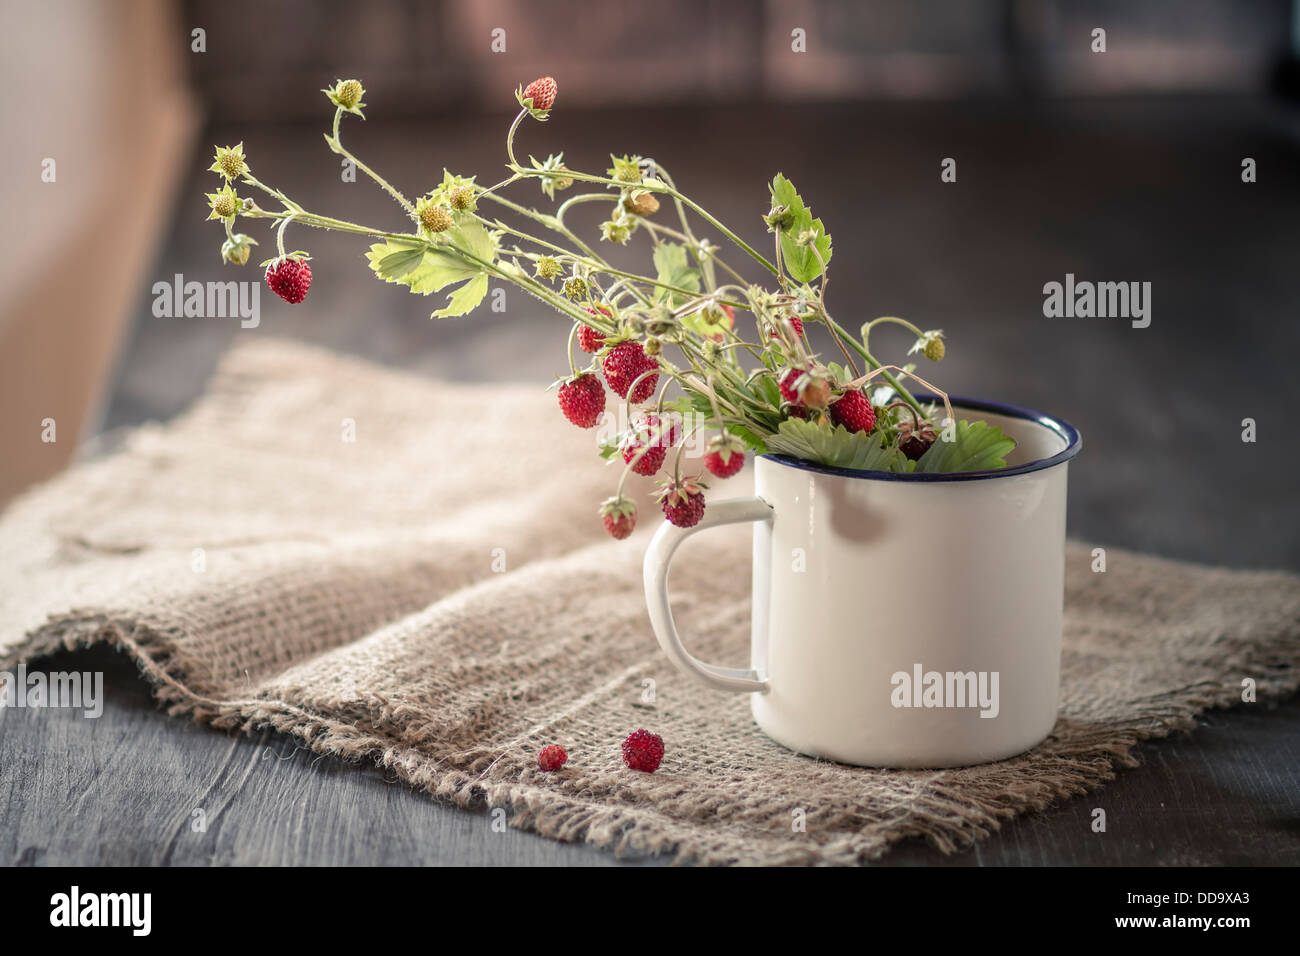 Germany, Baden Wuerttemberg, Bouquet of wild strawberries  in enamel cup on rug Stock Photo